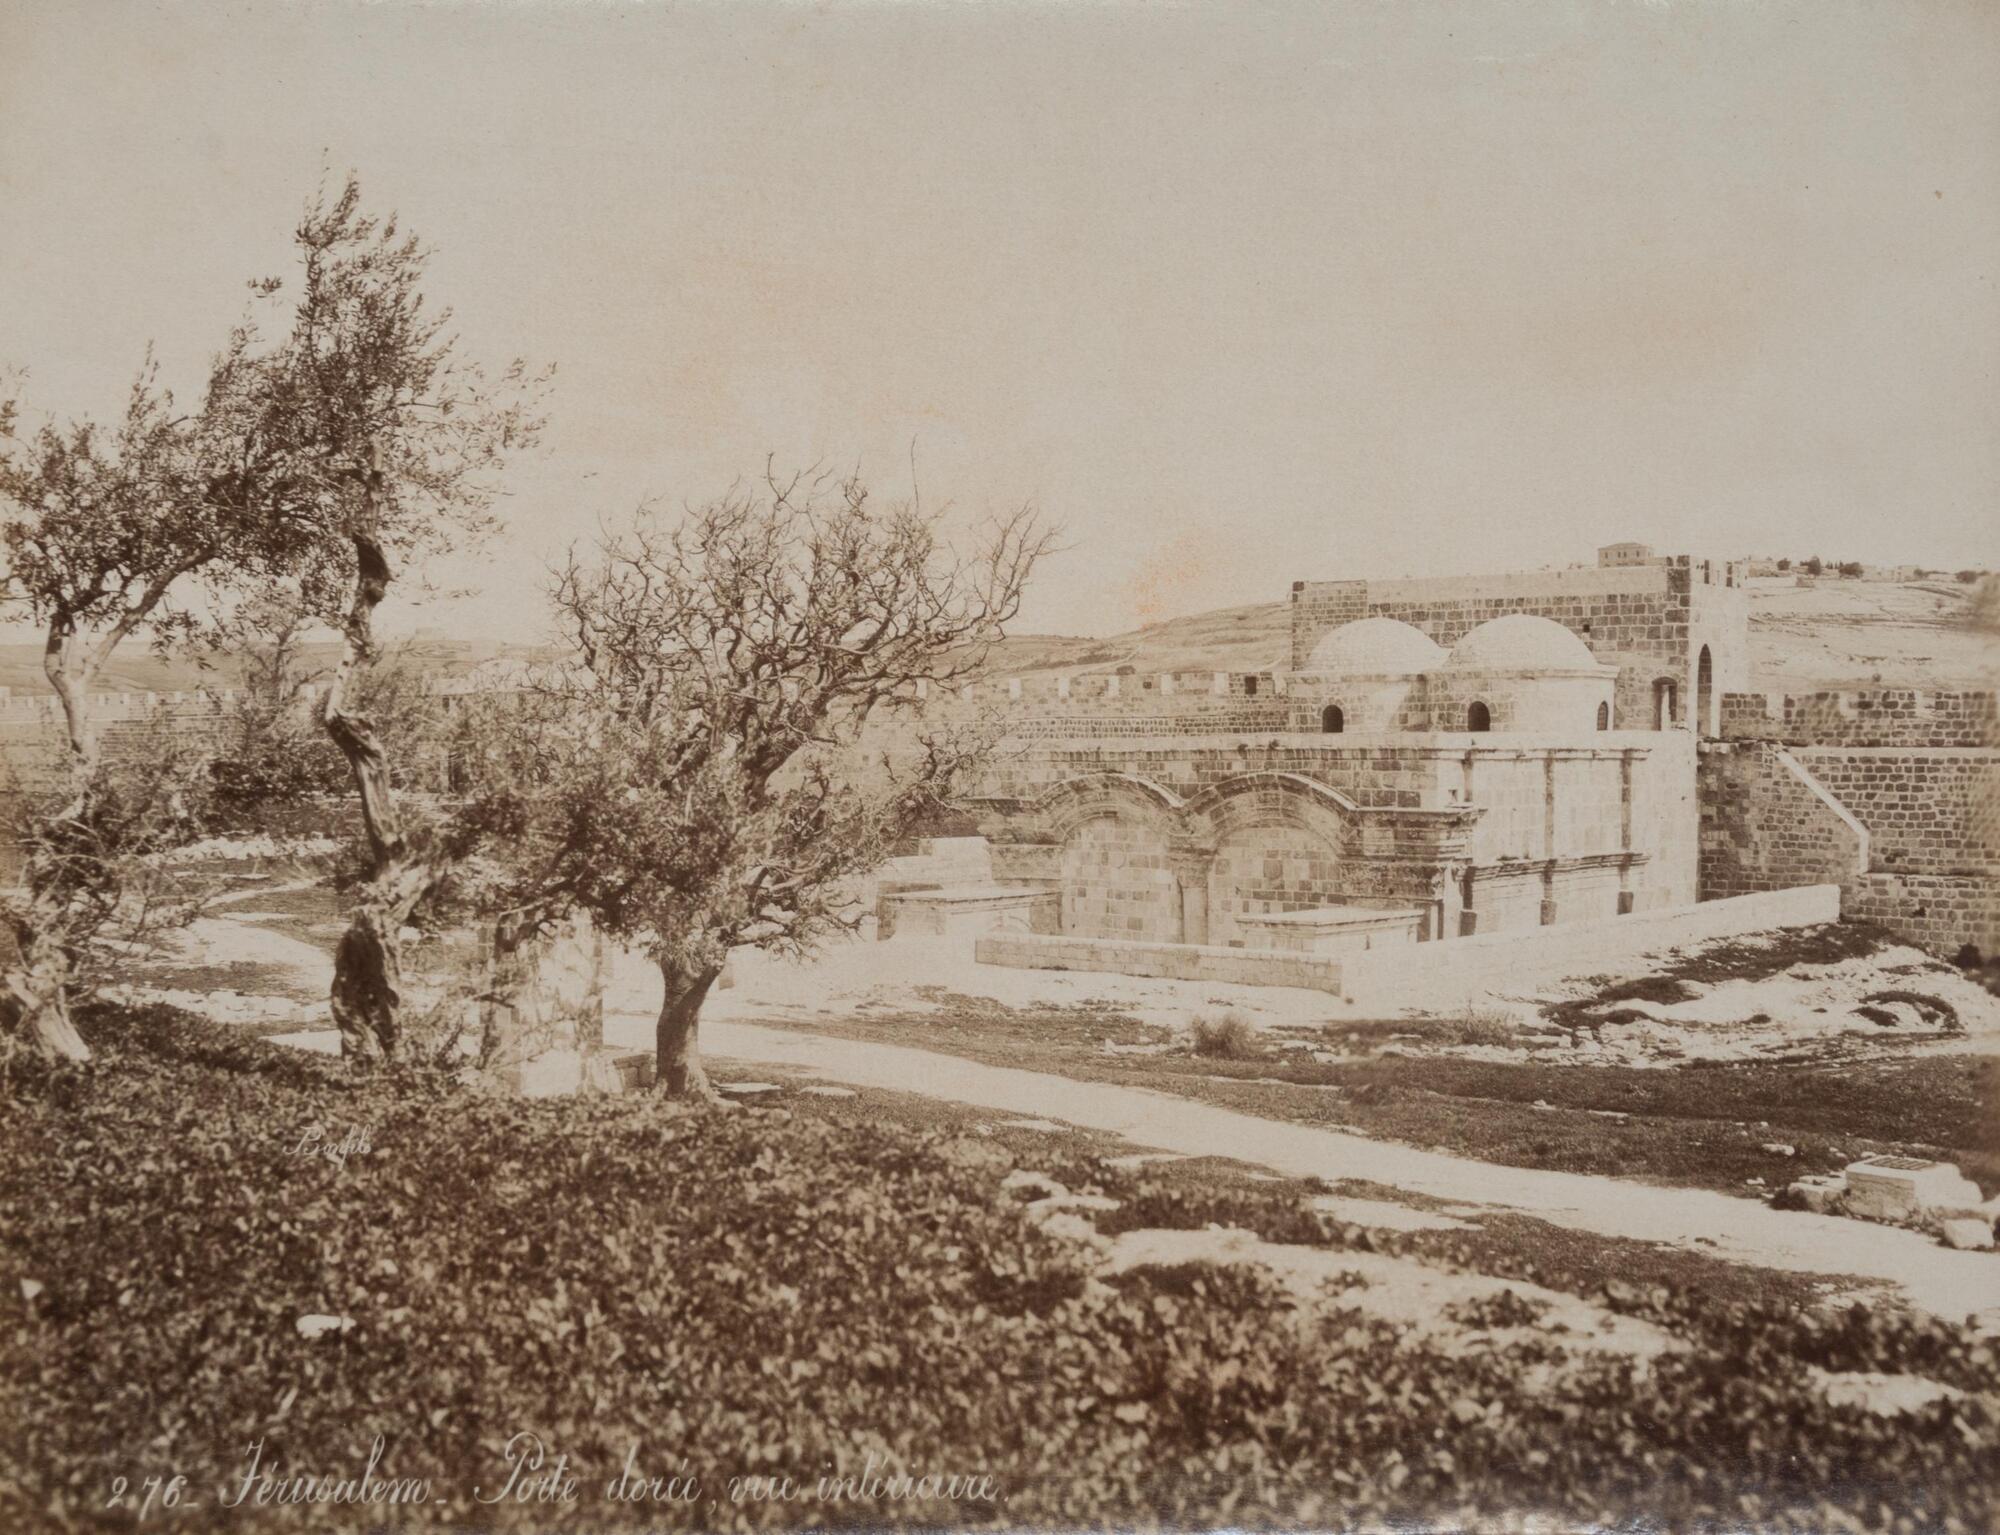 On the right-hand side of the photograph, a rectangular stone structure capped with two domed cylindrical turrets abuts a crenellated stone wall. Three trees in the foreground dominate the left-hand side of the image.